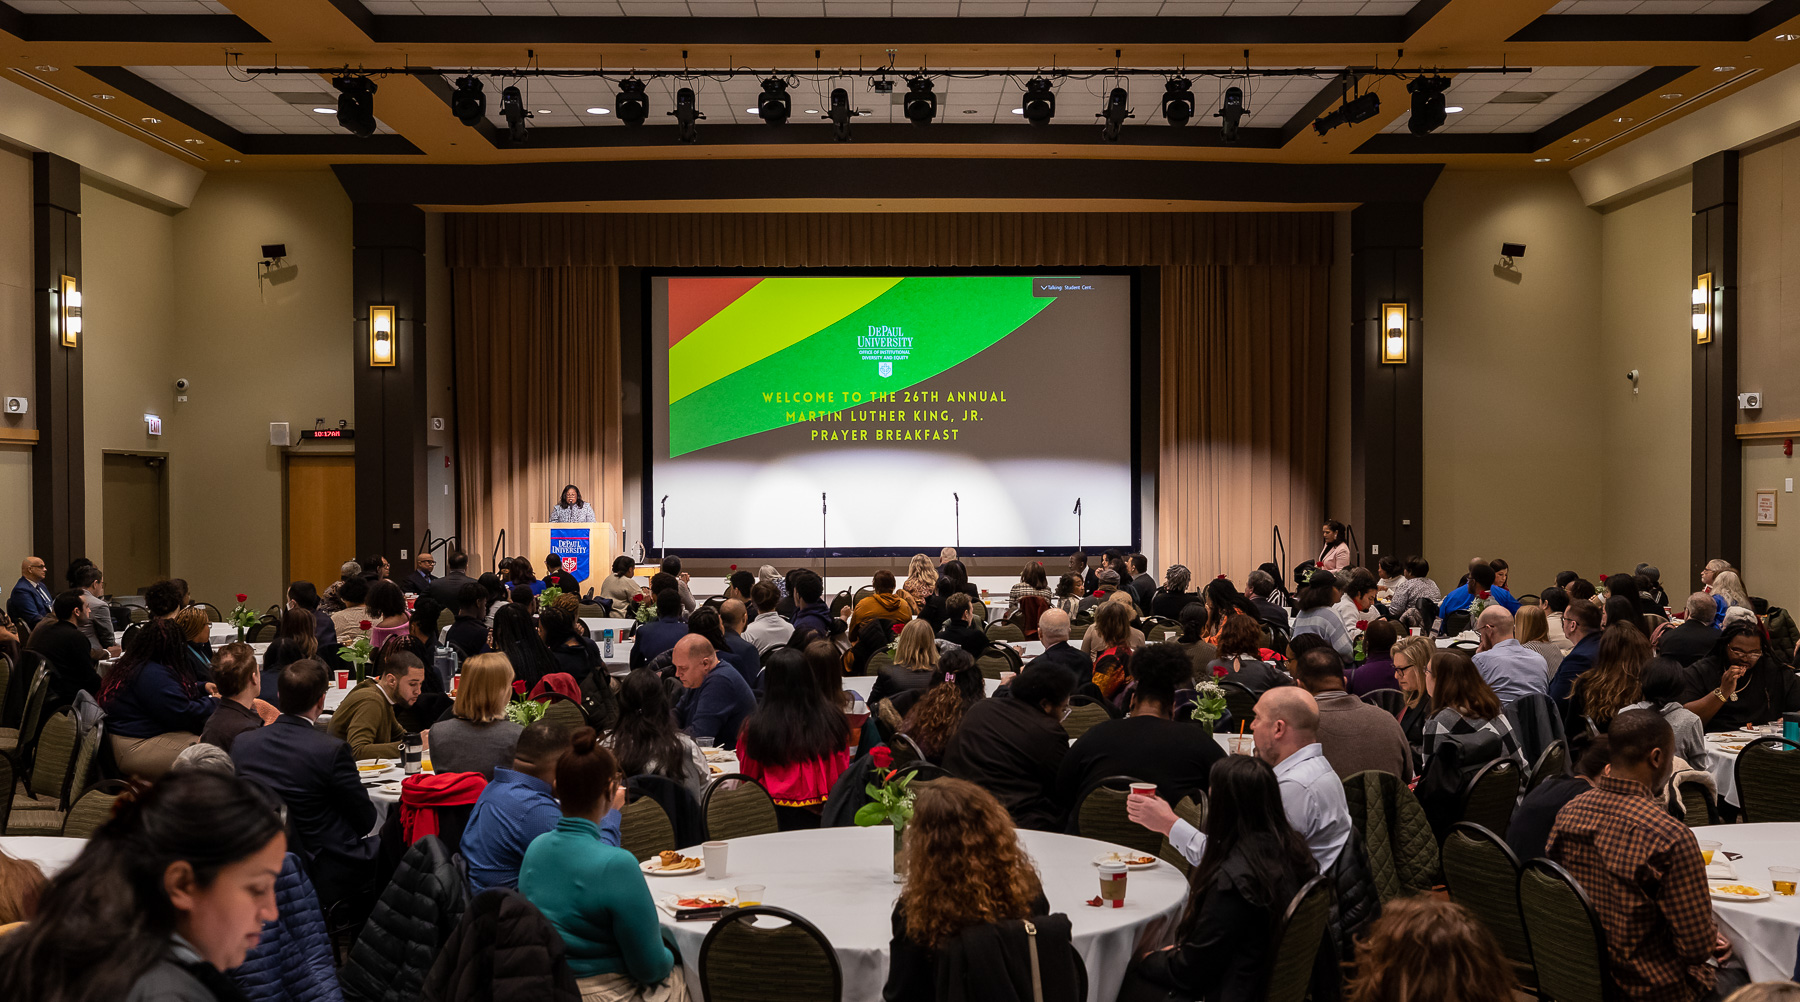 Faculty, staff, students, alumni and guests fill the Lincoln Park Student Center on Jan. 17 for the 26th annual Rev. Martin Luther King Jr. Prayer Breakfast.